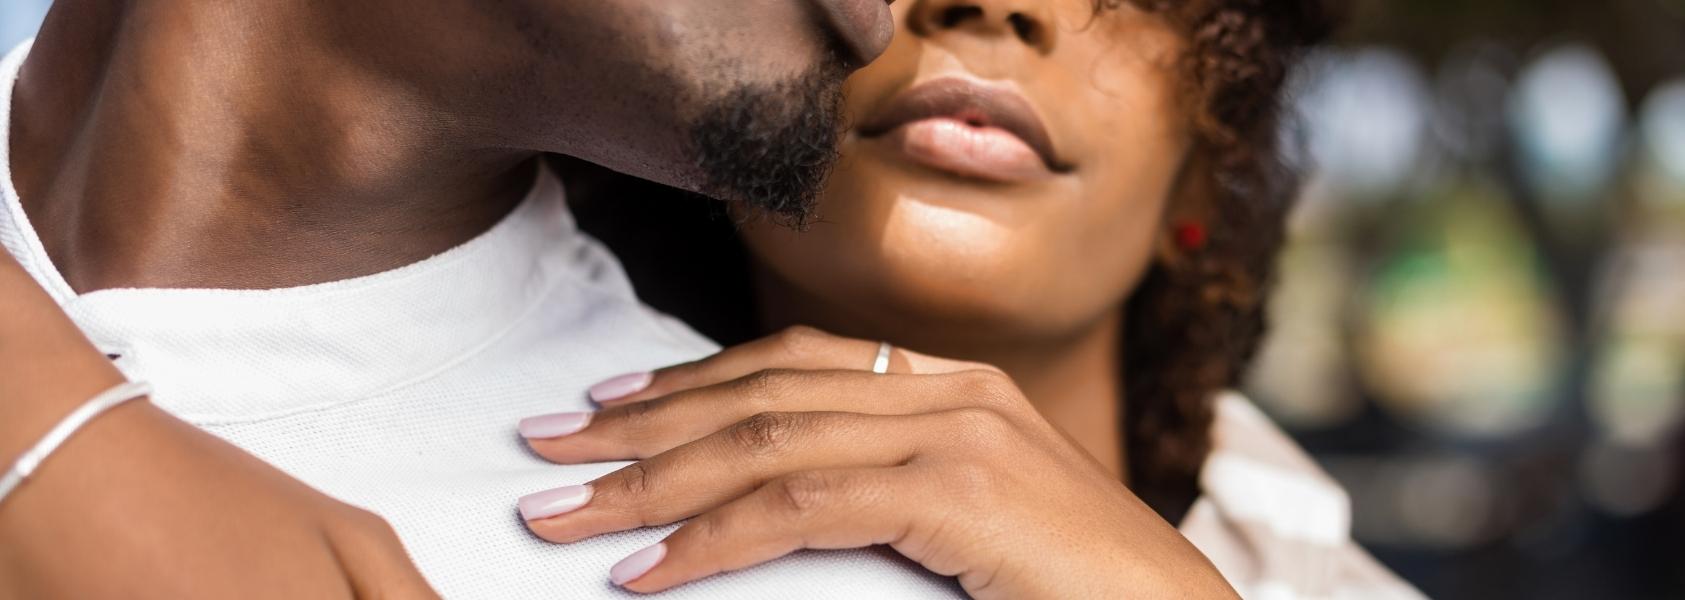 How Your Attachment Style Impacts Your Marriage